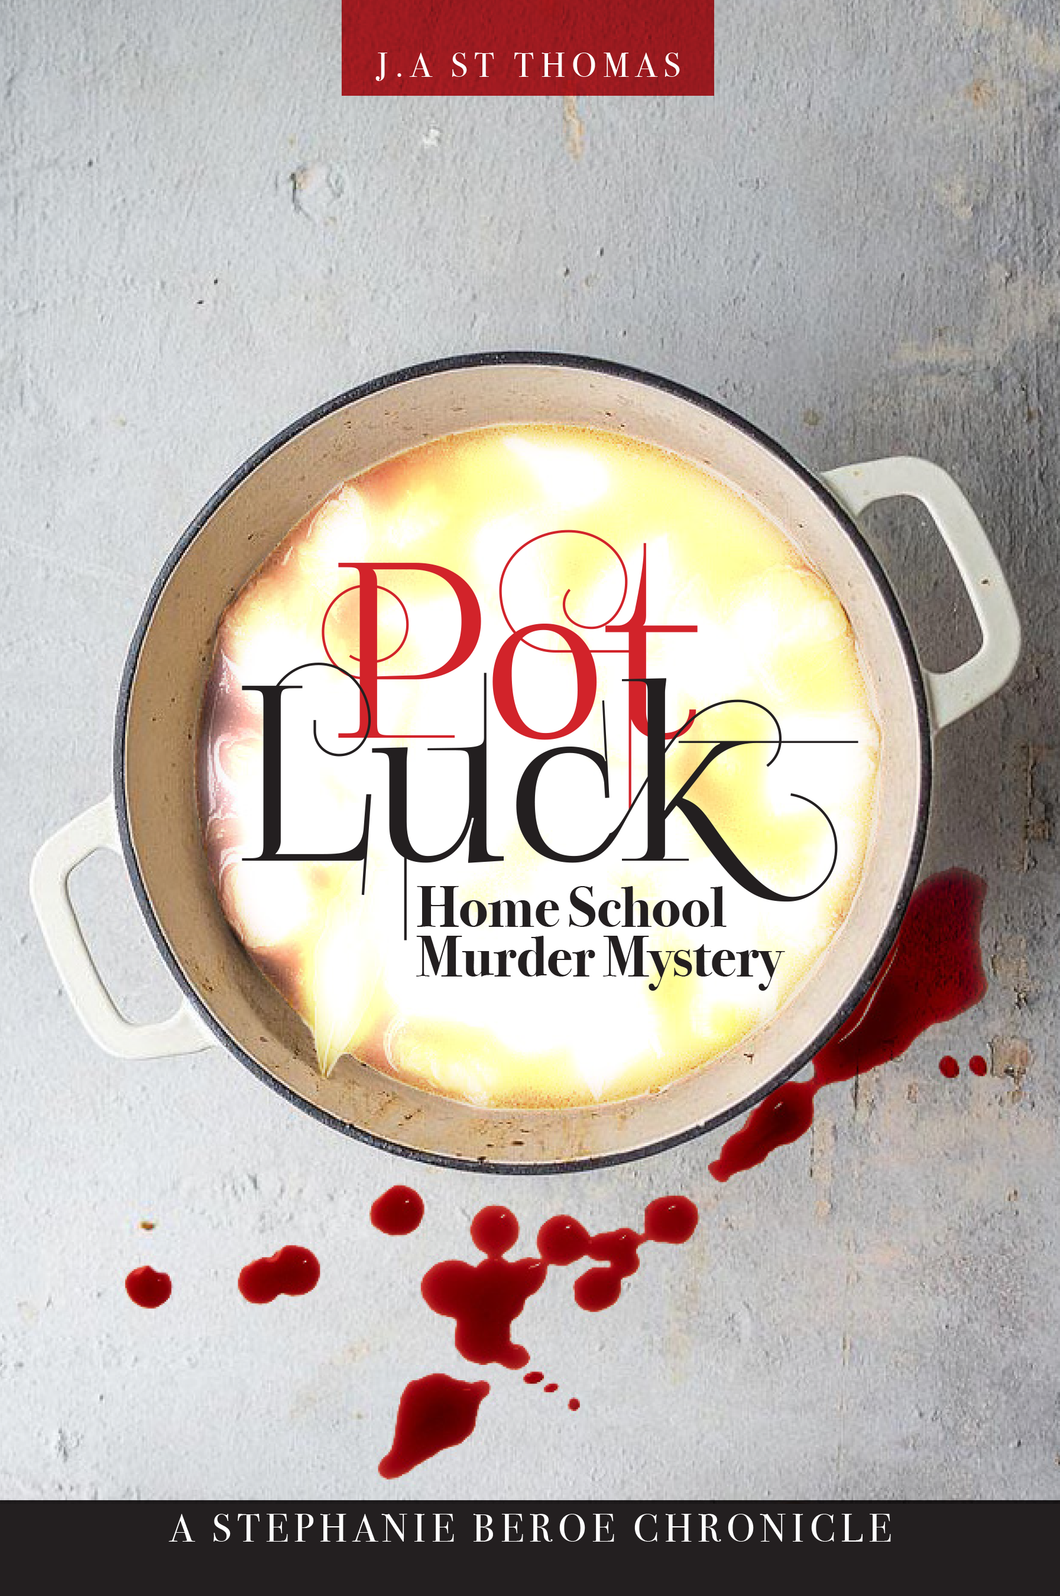 NEW RELEASE! Pot Luck Home School Murder Mystery By J.A. ST. Thomas